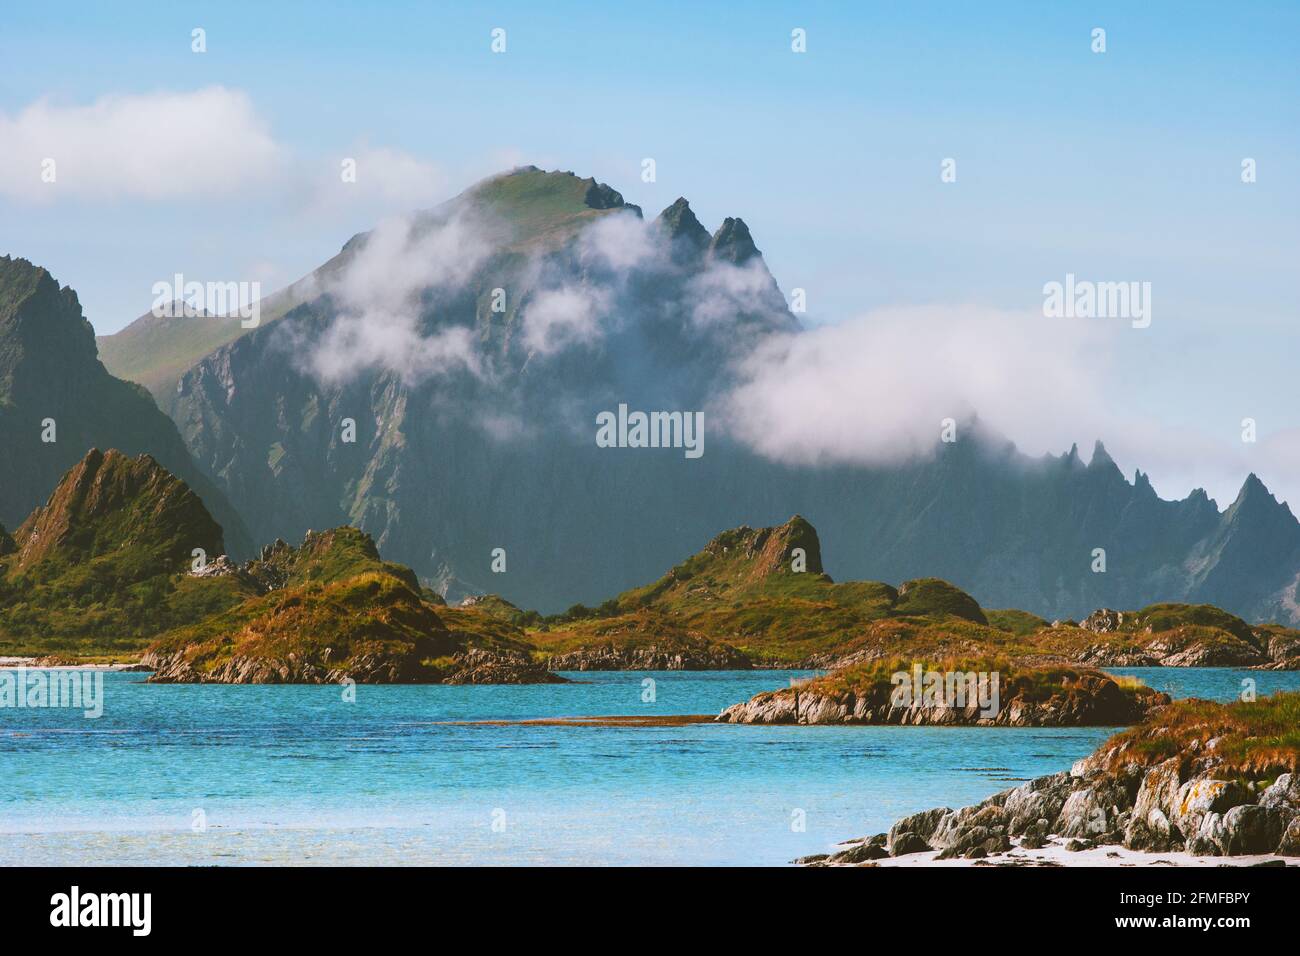 Landscape mountains and ocean in Norway summer season travel destinations nature scenery Vesteralen islands Stock Photo